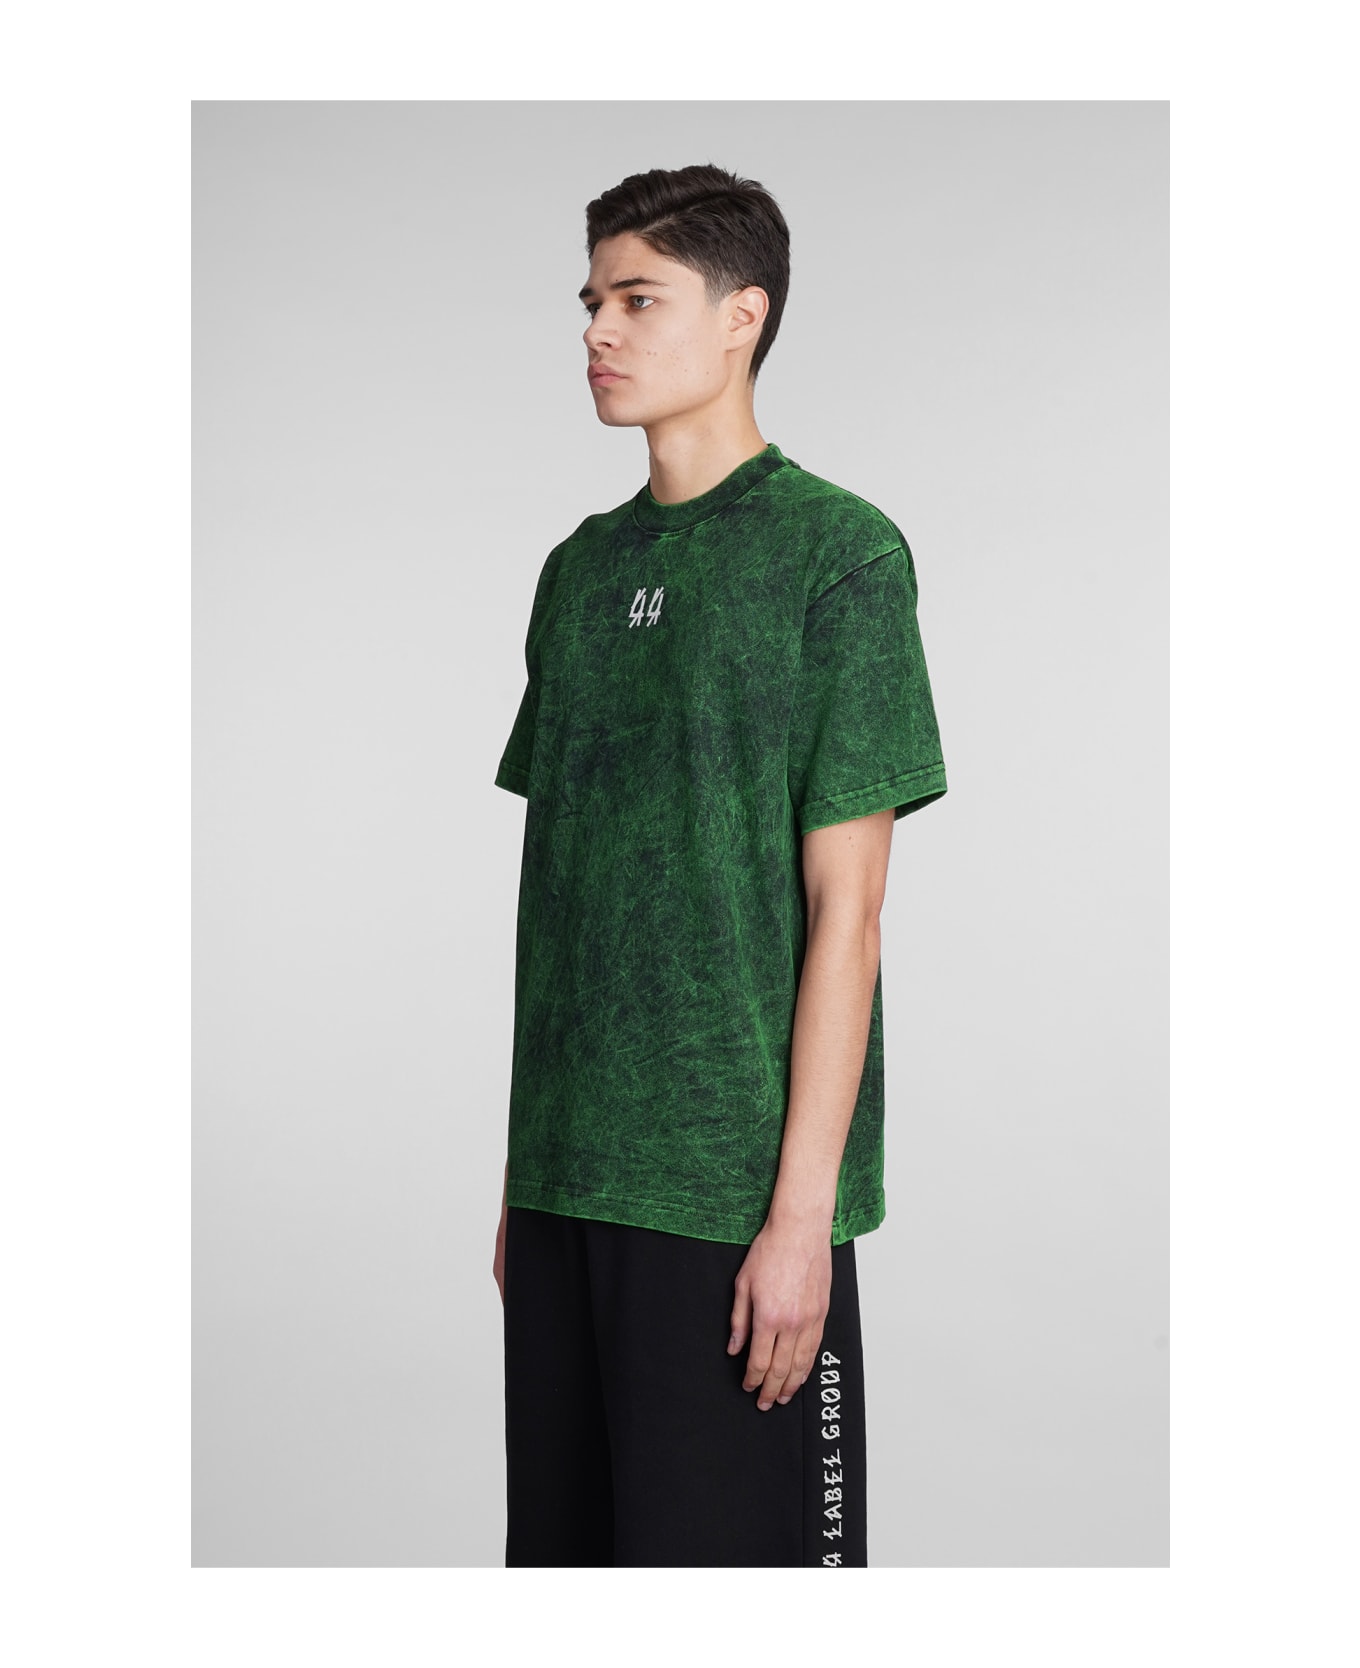 44 Label Group T-shirt In Green Cotton - Blk+sol.green + 44 solid